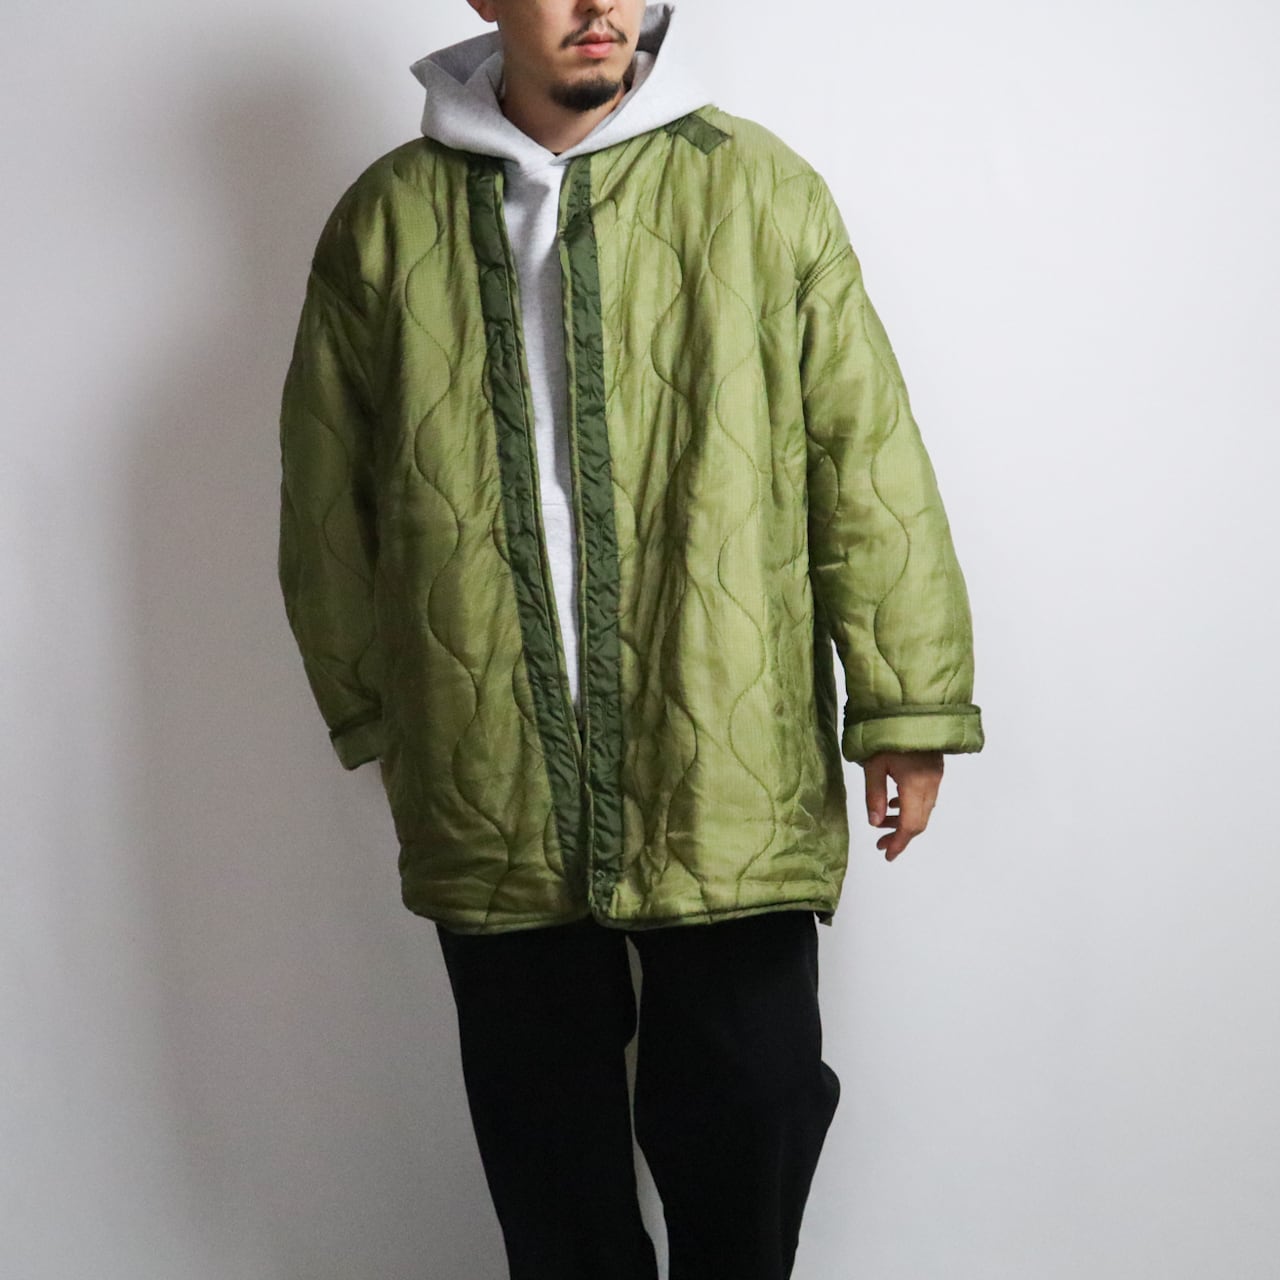 【DEAD STOCK】U.S.ARMY M-65 FISHTAIL PARKA LINER 米軍 M65 フィッシュテールパーカー ライナー